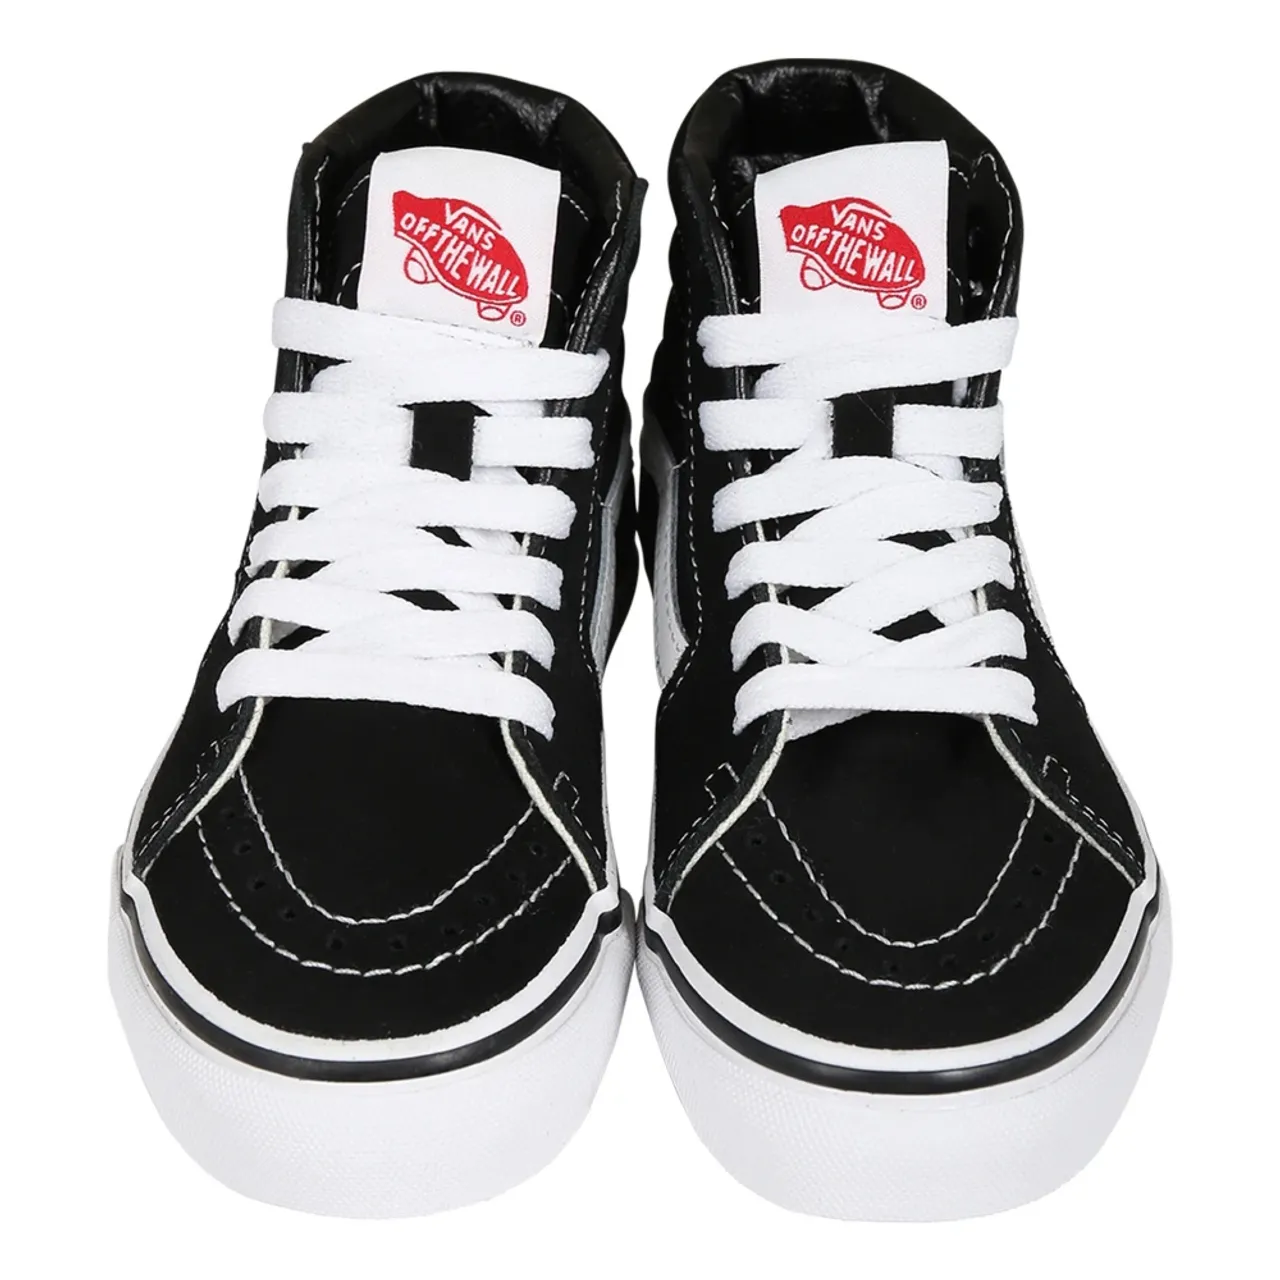 Vans , Black High-Top Sneakers with Waffle Sole ,Black unisex, Sizes: